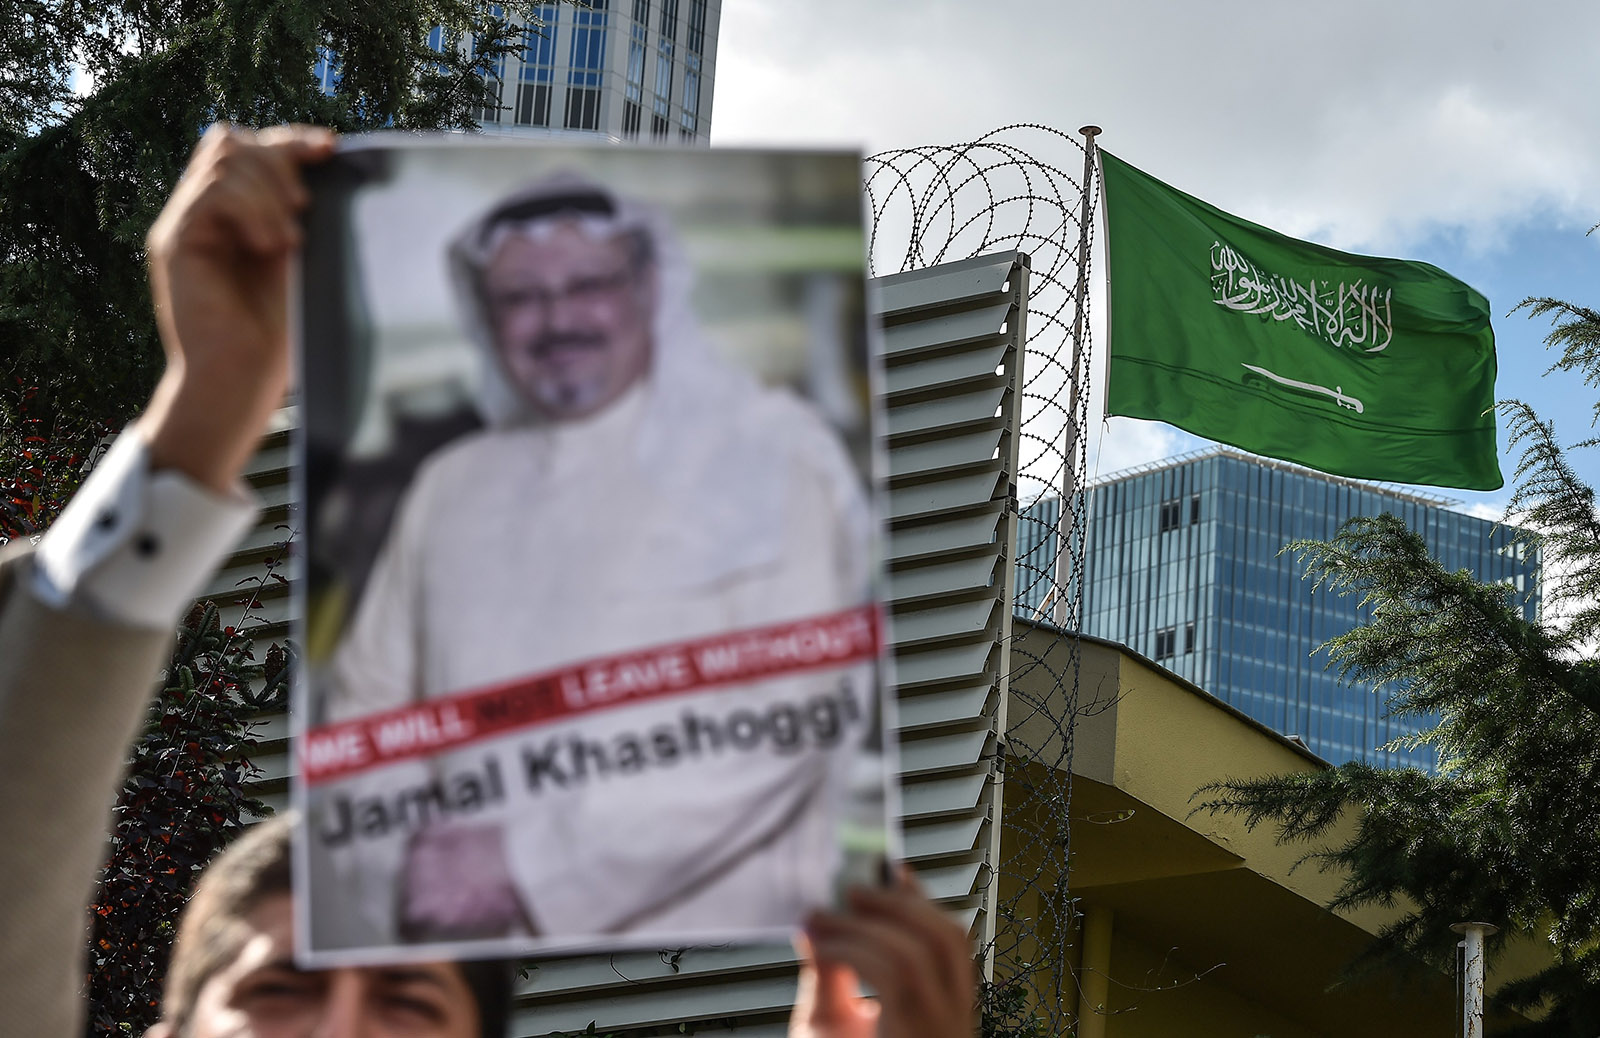 A protest in front of the Saudi Consulate against the disappearance of journalist Jamal Khashoggi, Istanbul, Turkey, October 5, 2018